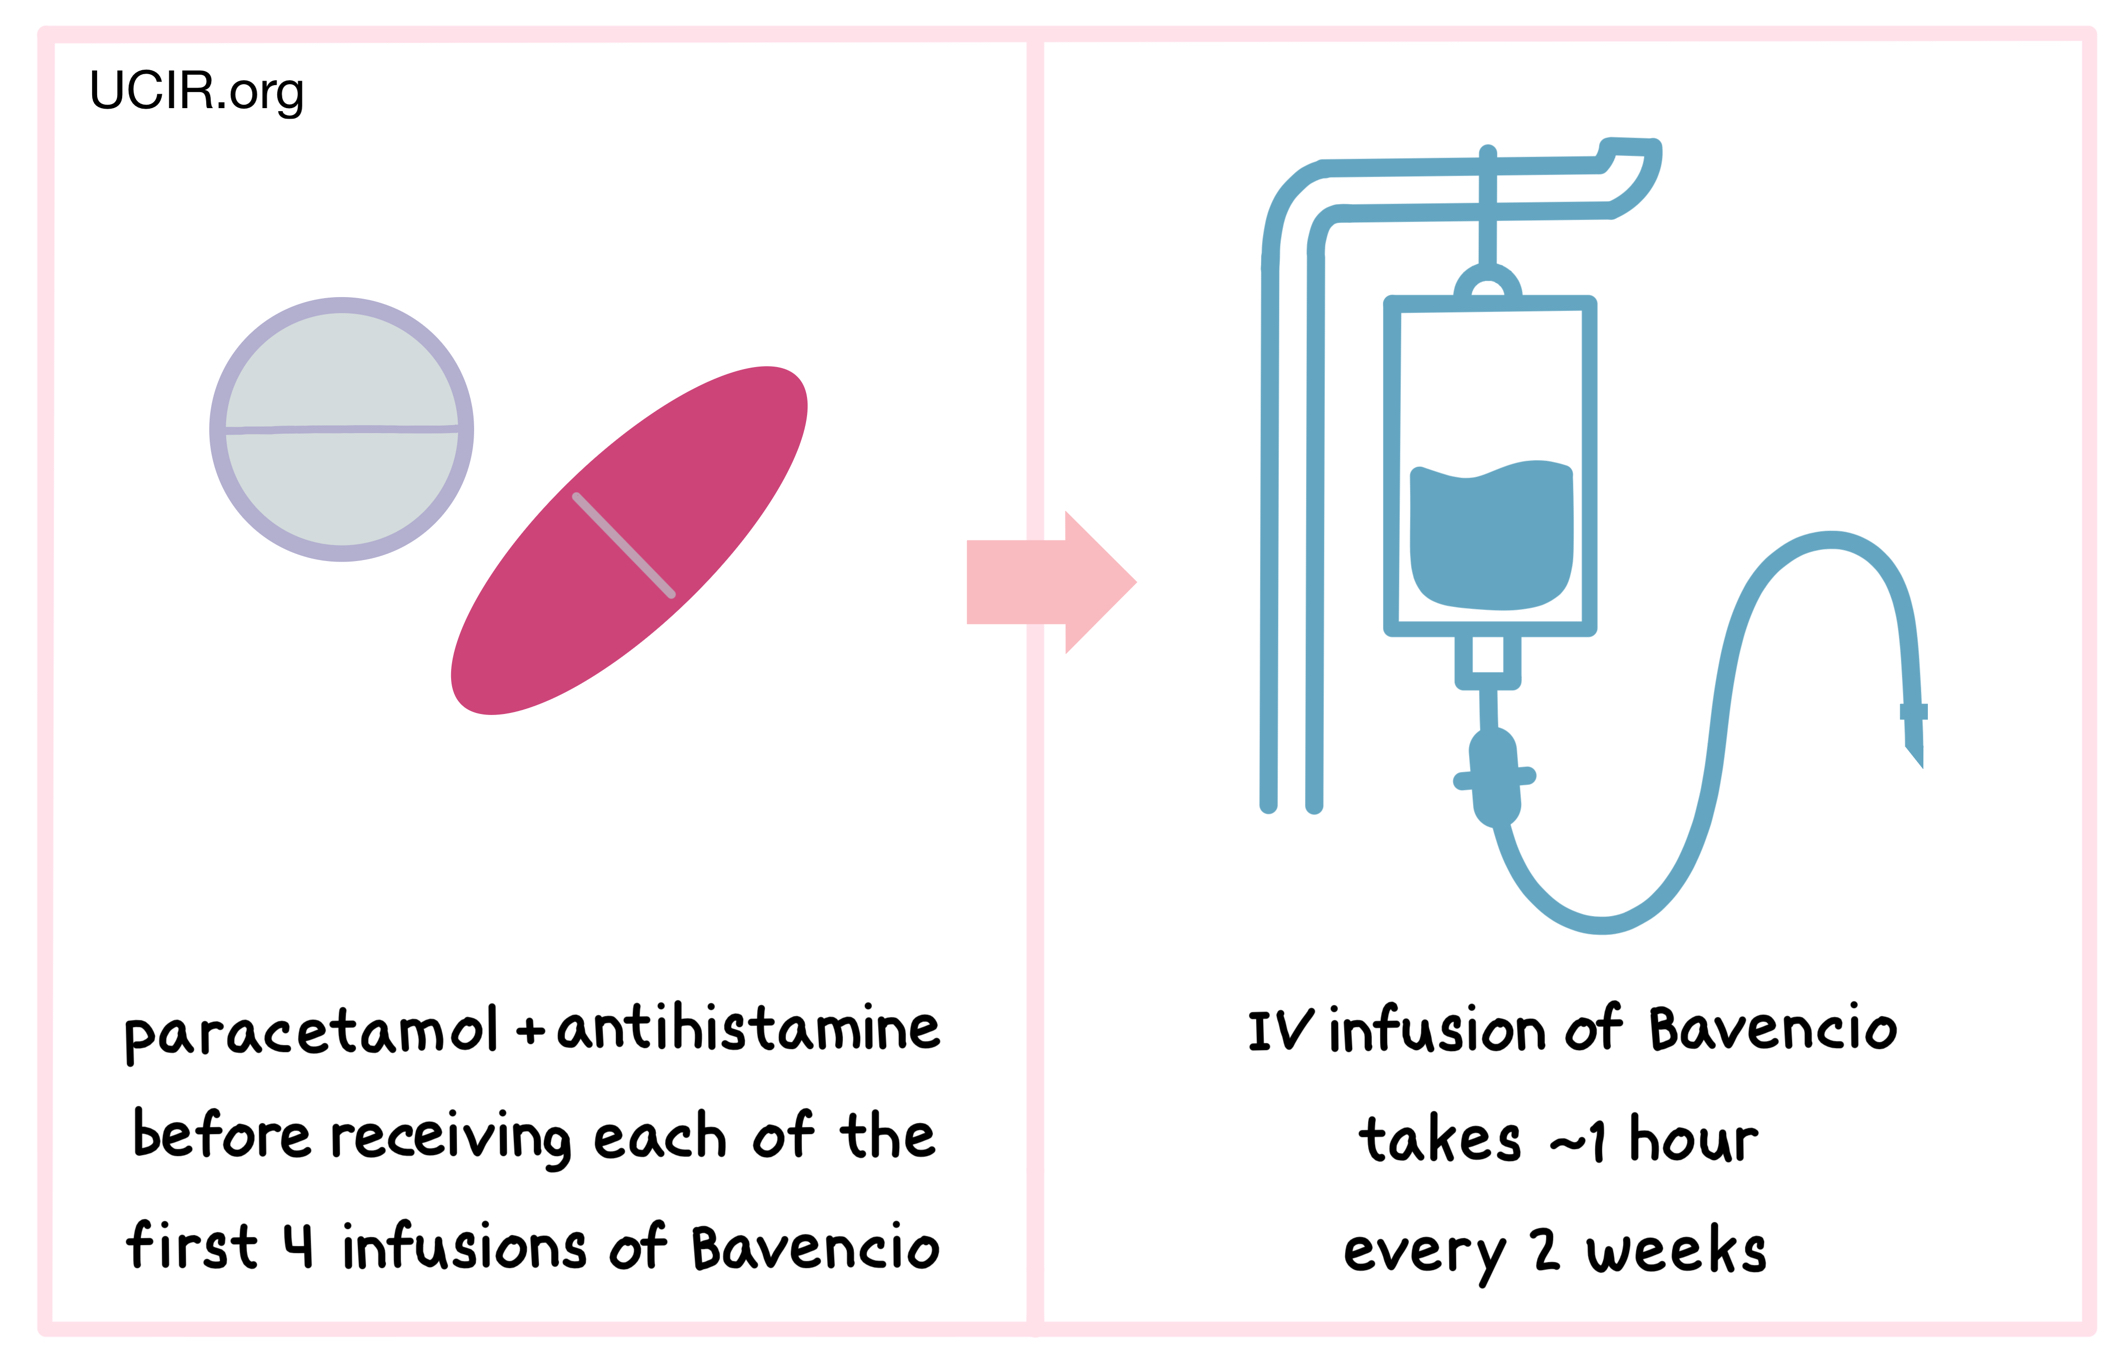 Illustration of how Bavencio is administered 